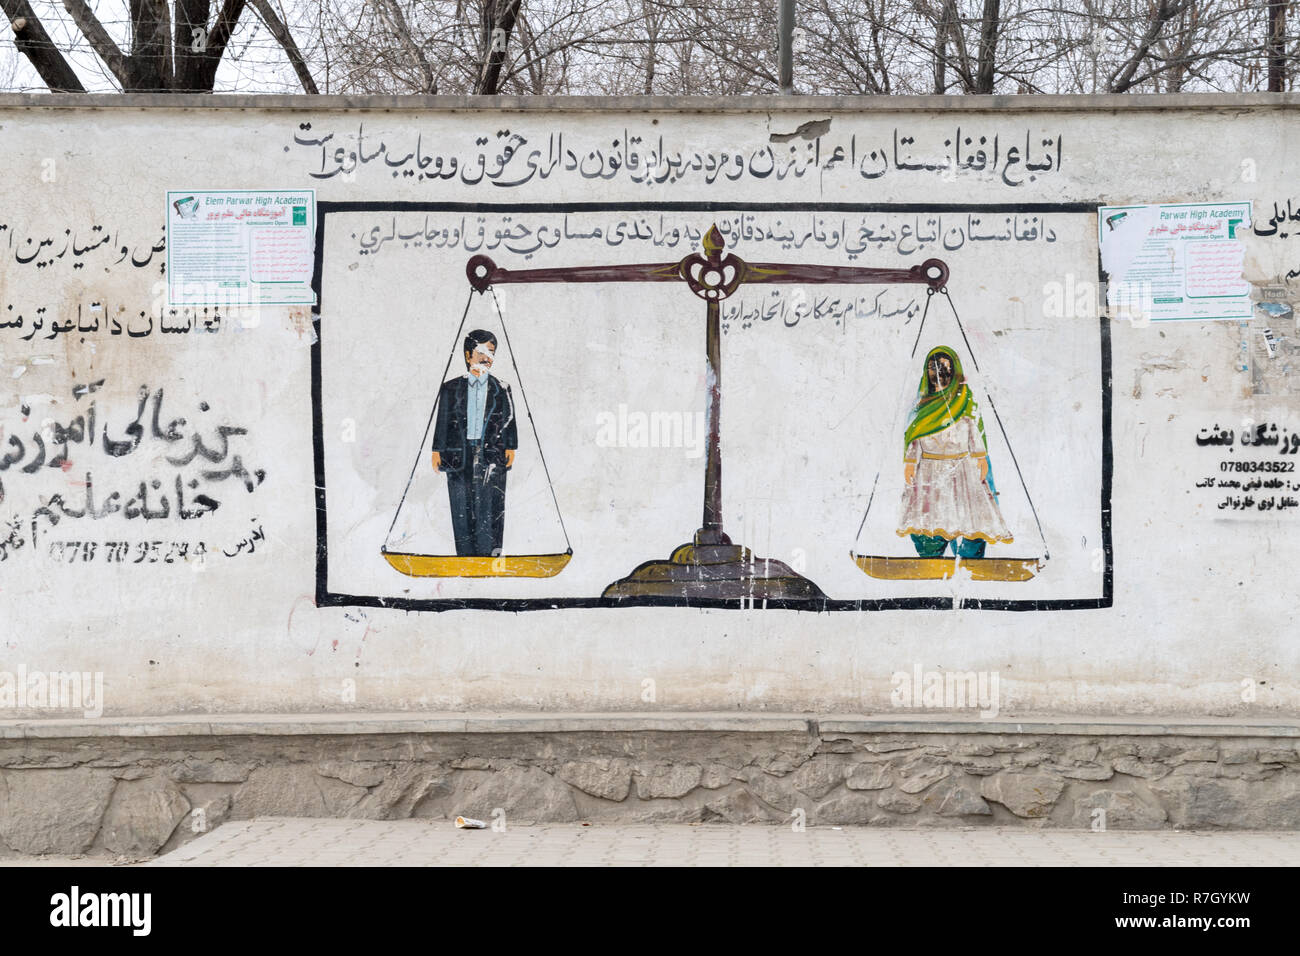 Wall Painting Symbolizing Gender Equality Between Men And Women, Kabul, Kabul Province, Afghanistan Stock Photo